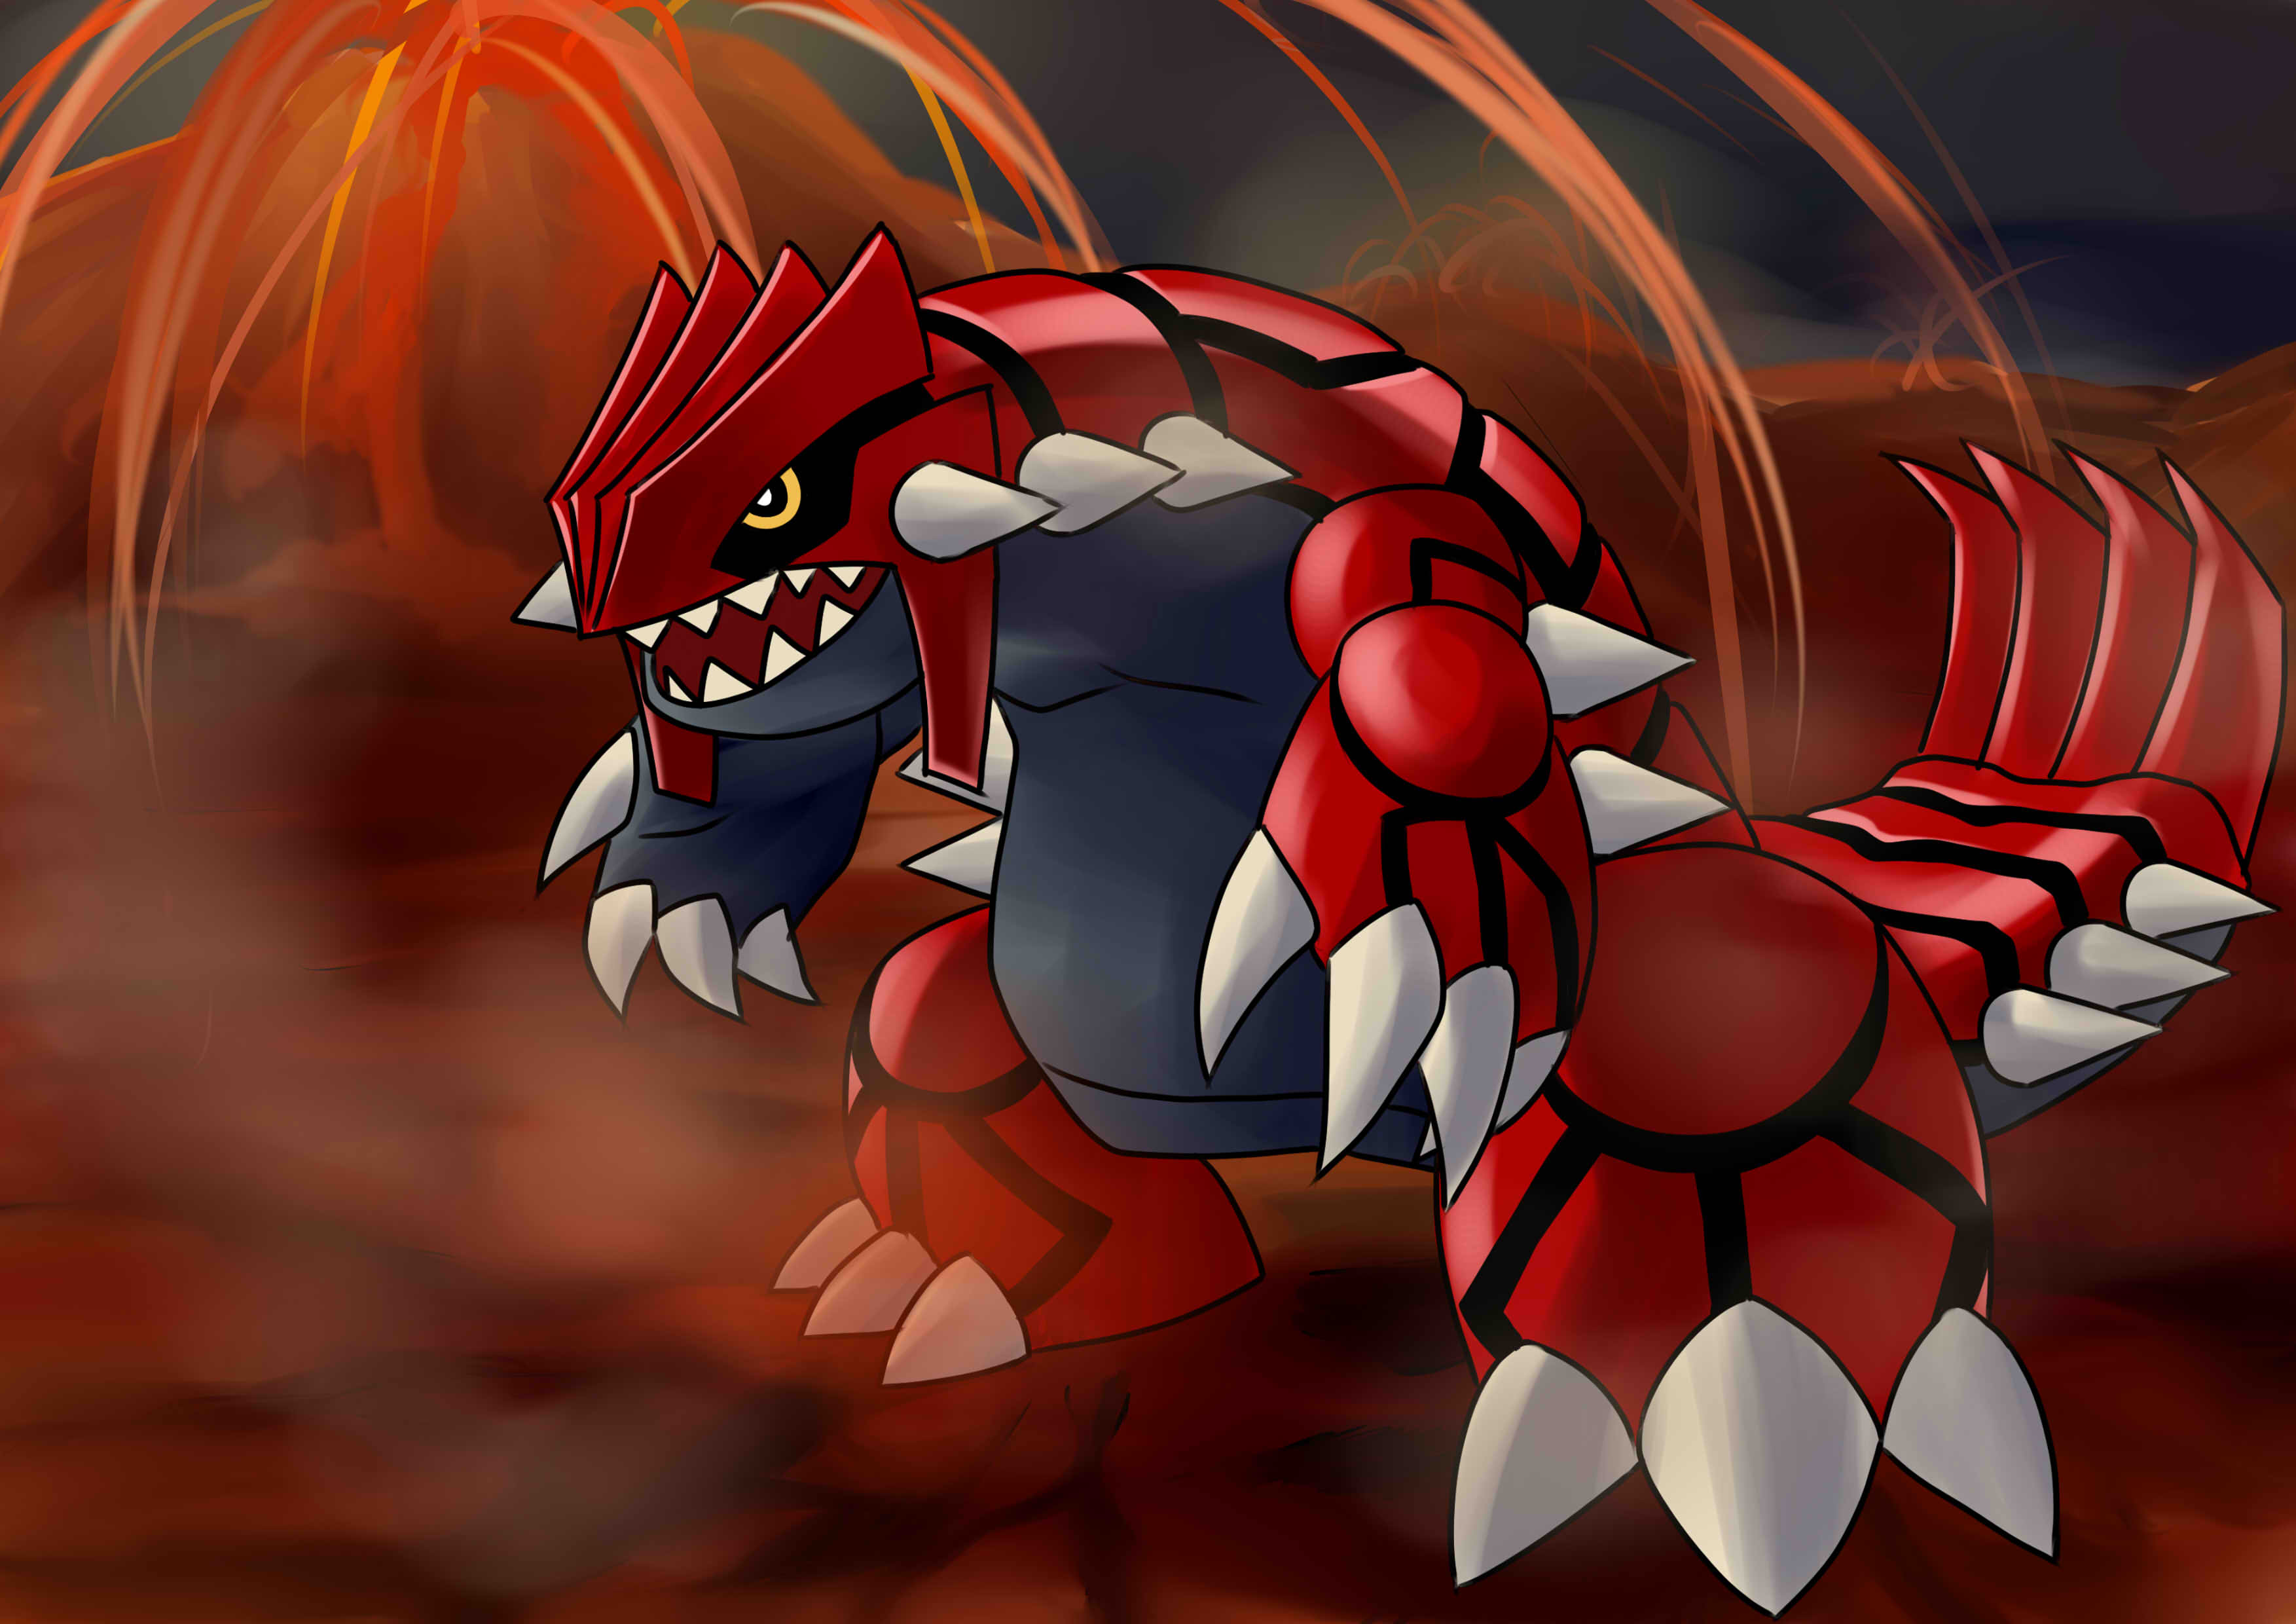 Legendary Pokemon Kyogre and Groudon now available for Pokemon Sun and Moon  | VG247